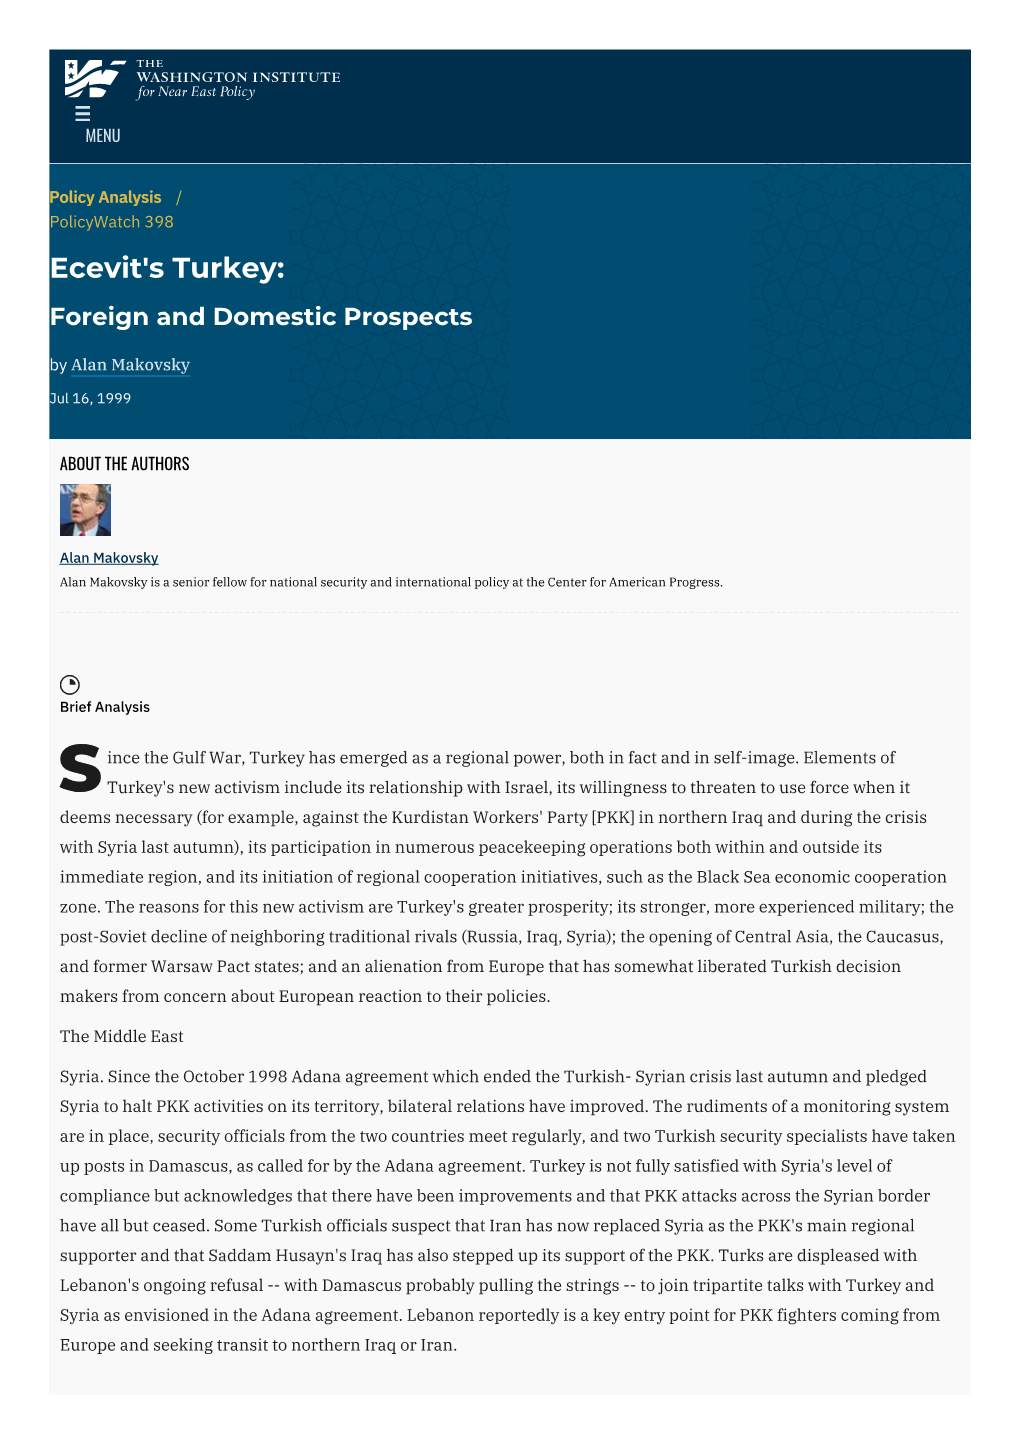 Ecevit's Turkey: Foreign and Domestic Prospects | the Washington Institute